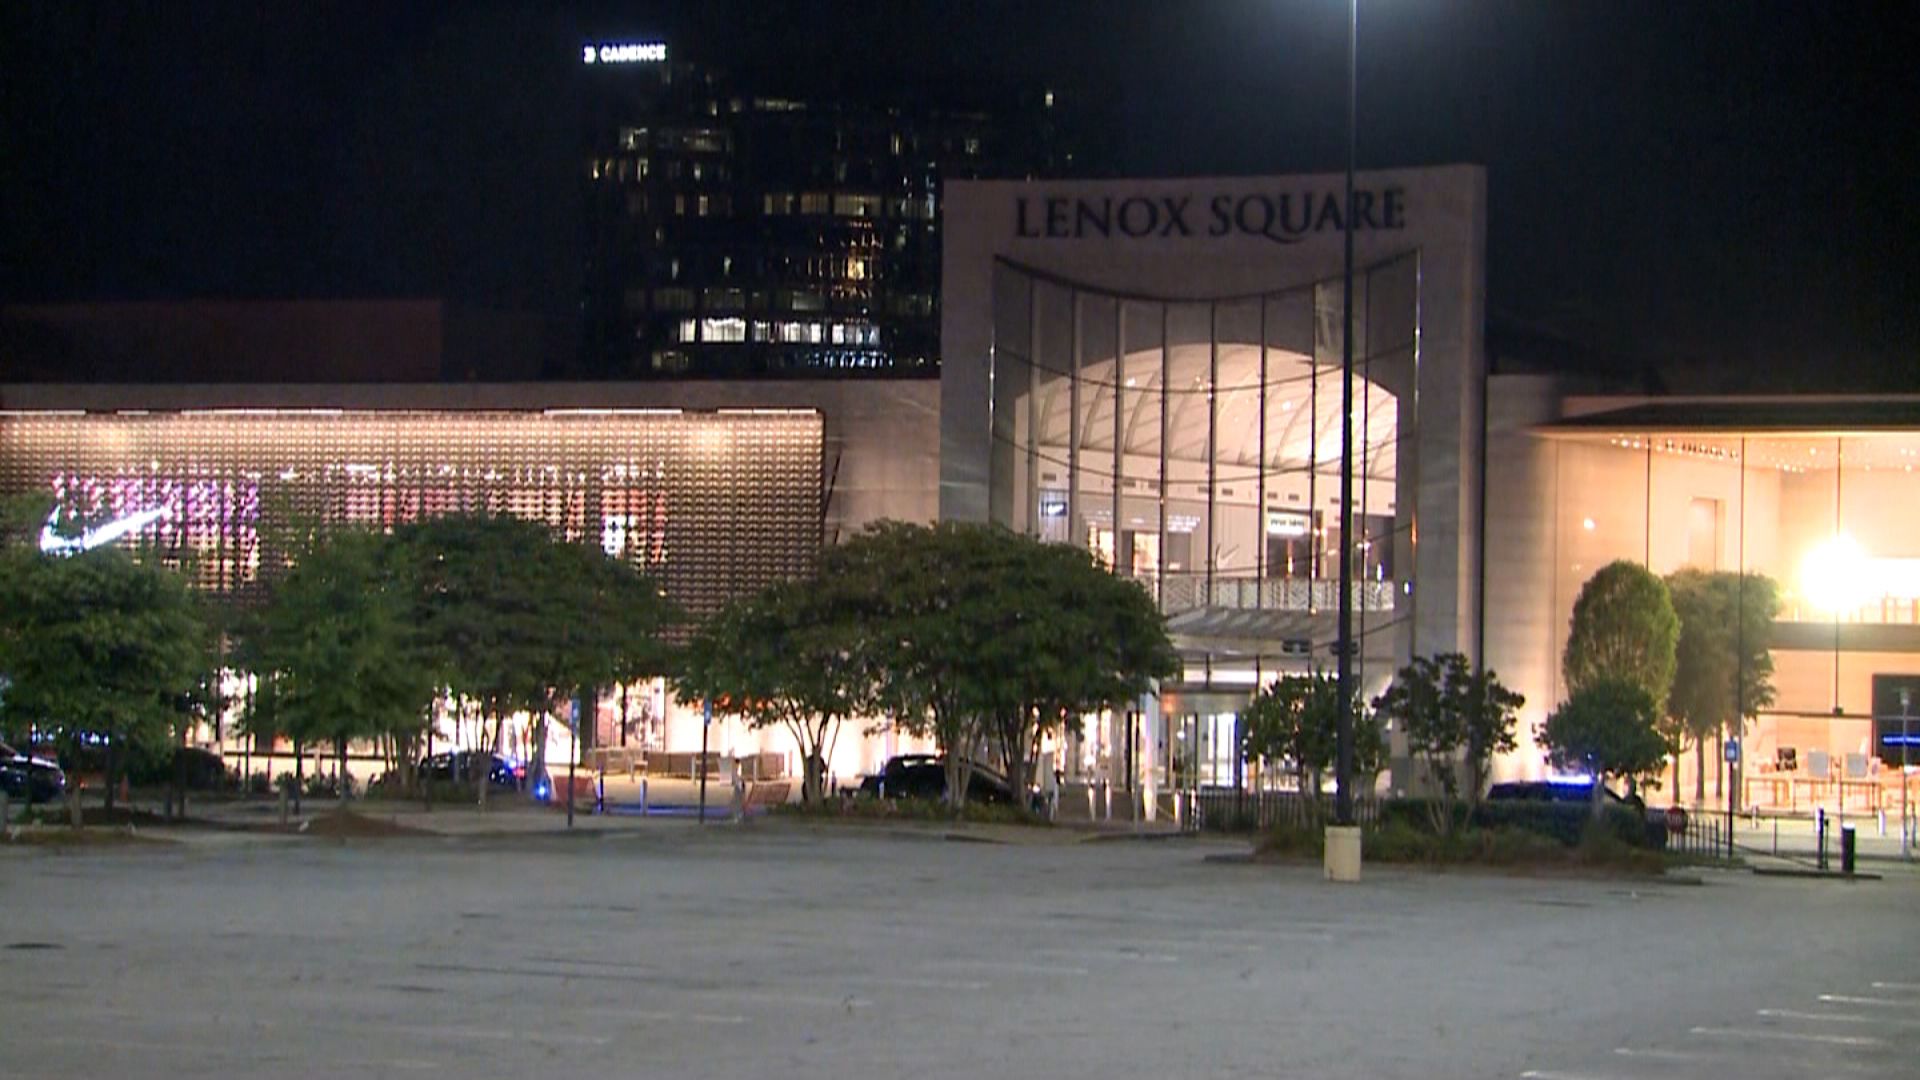 Argument leads to shooting at Apple Store in Atlanta's Lenox